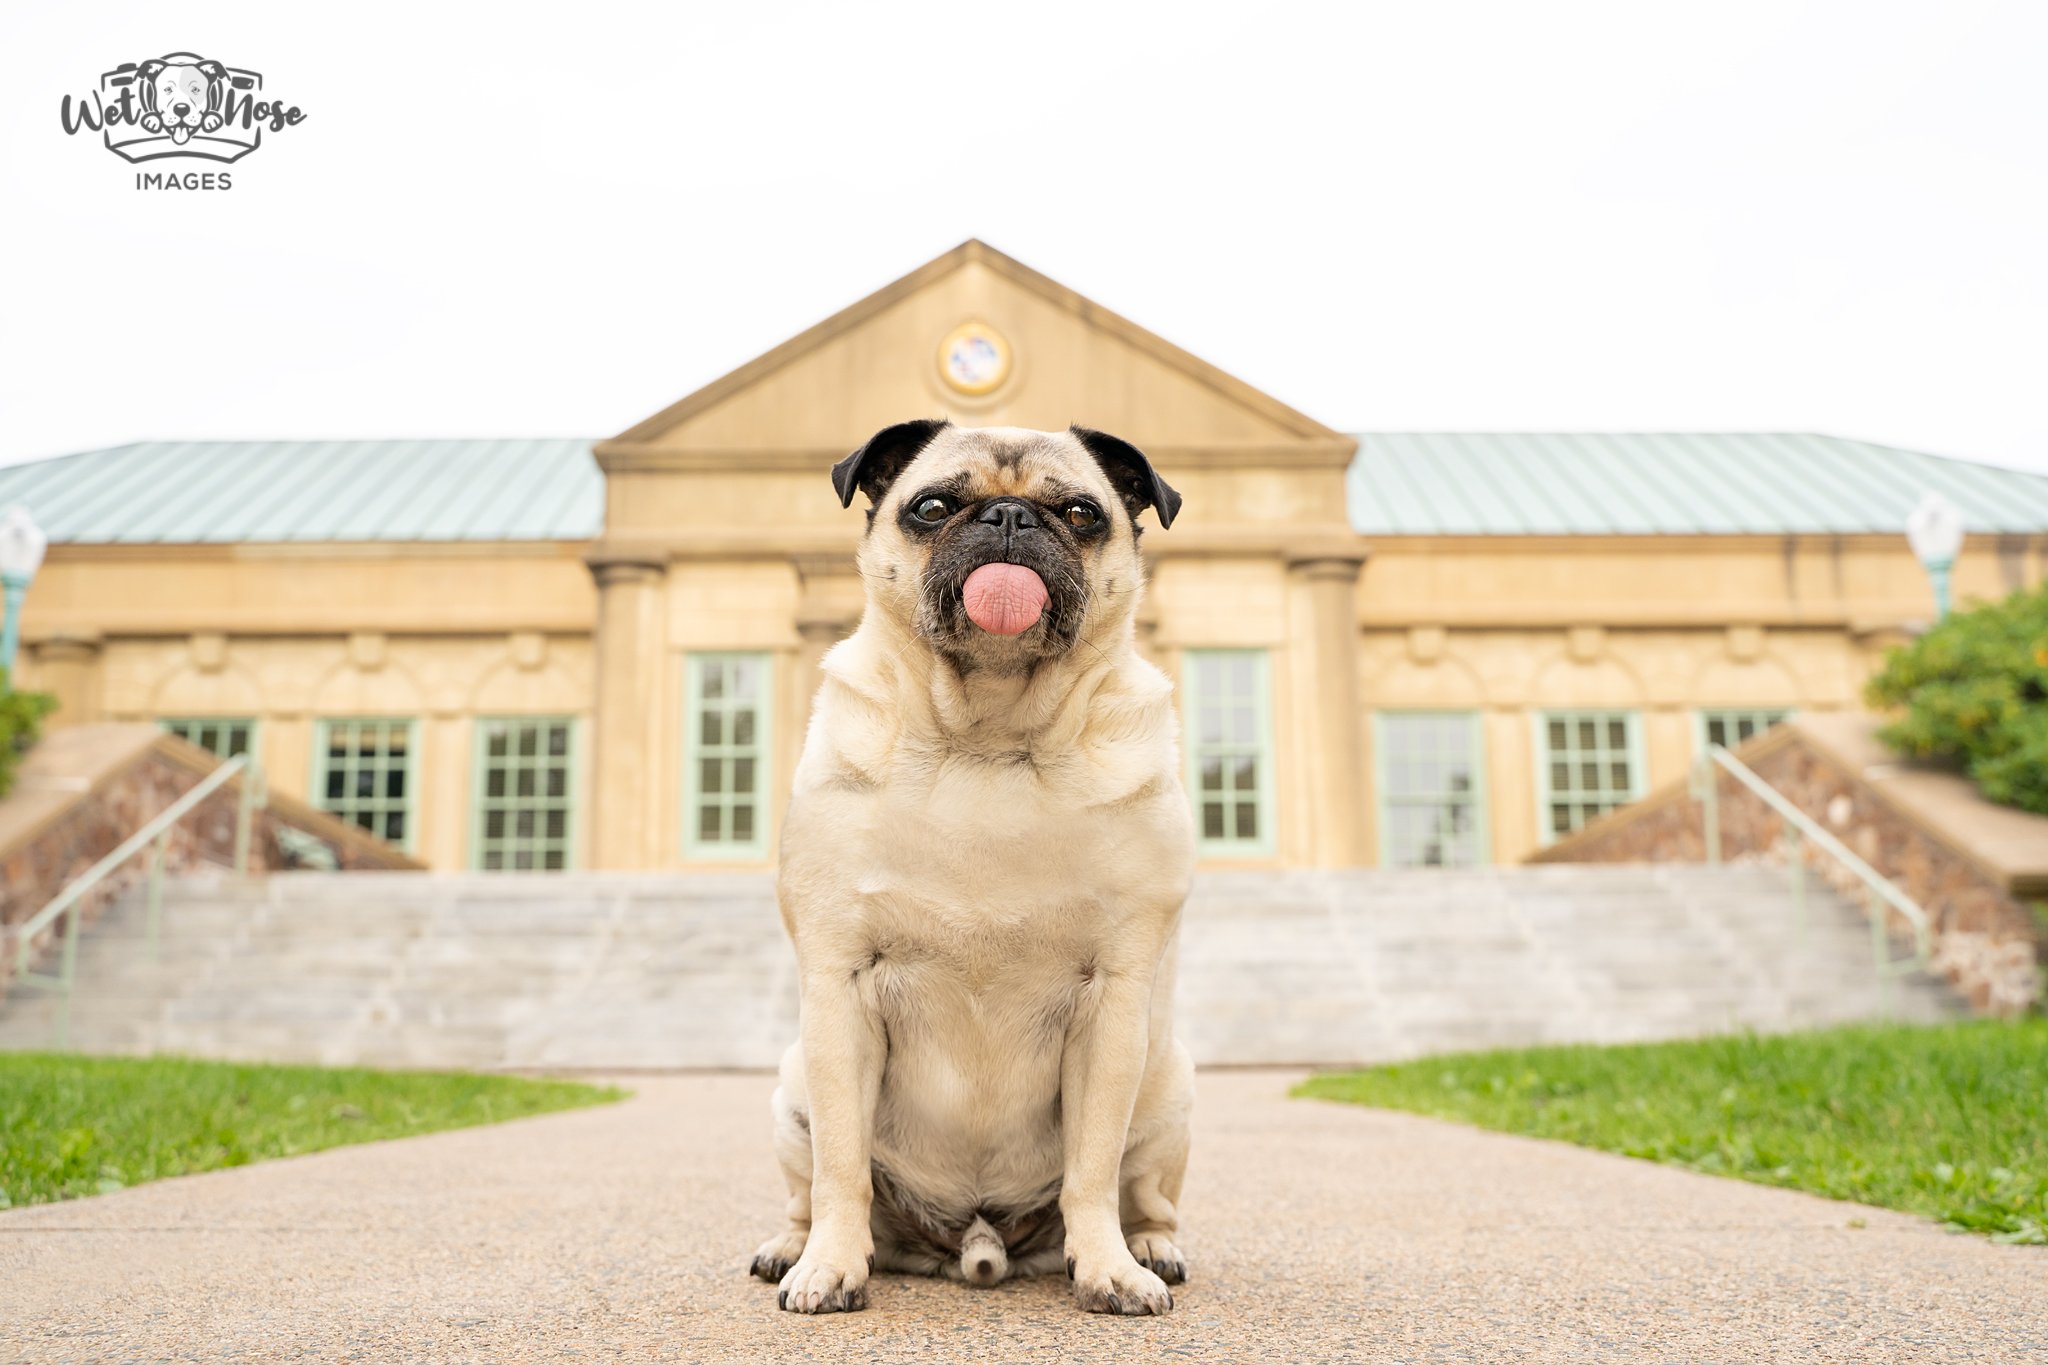 Remember wayyy back in 2021 (haha) when I published my first book, &quot;Tails of Halifax&quot;?

That was an AWESOME adventure of a year. I photographed about 50 dogs and we went to every iconic Halifax landmark I could think of! Every dog got their